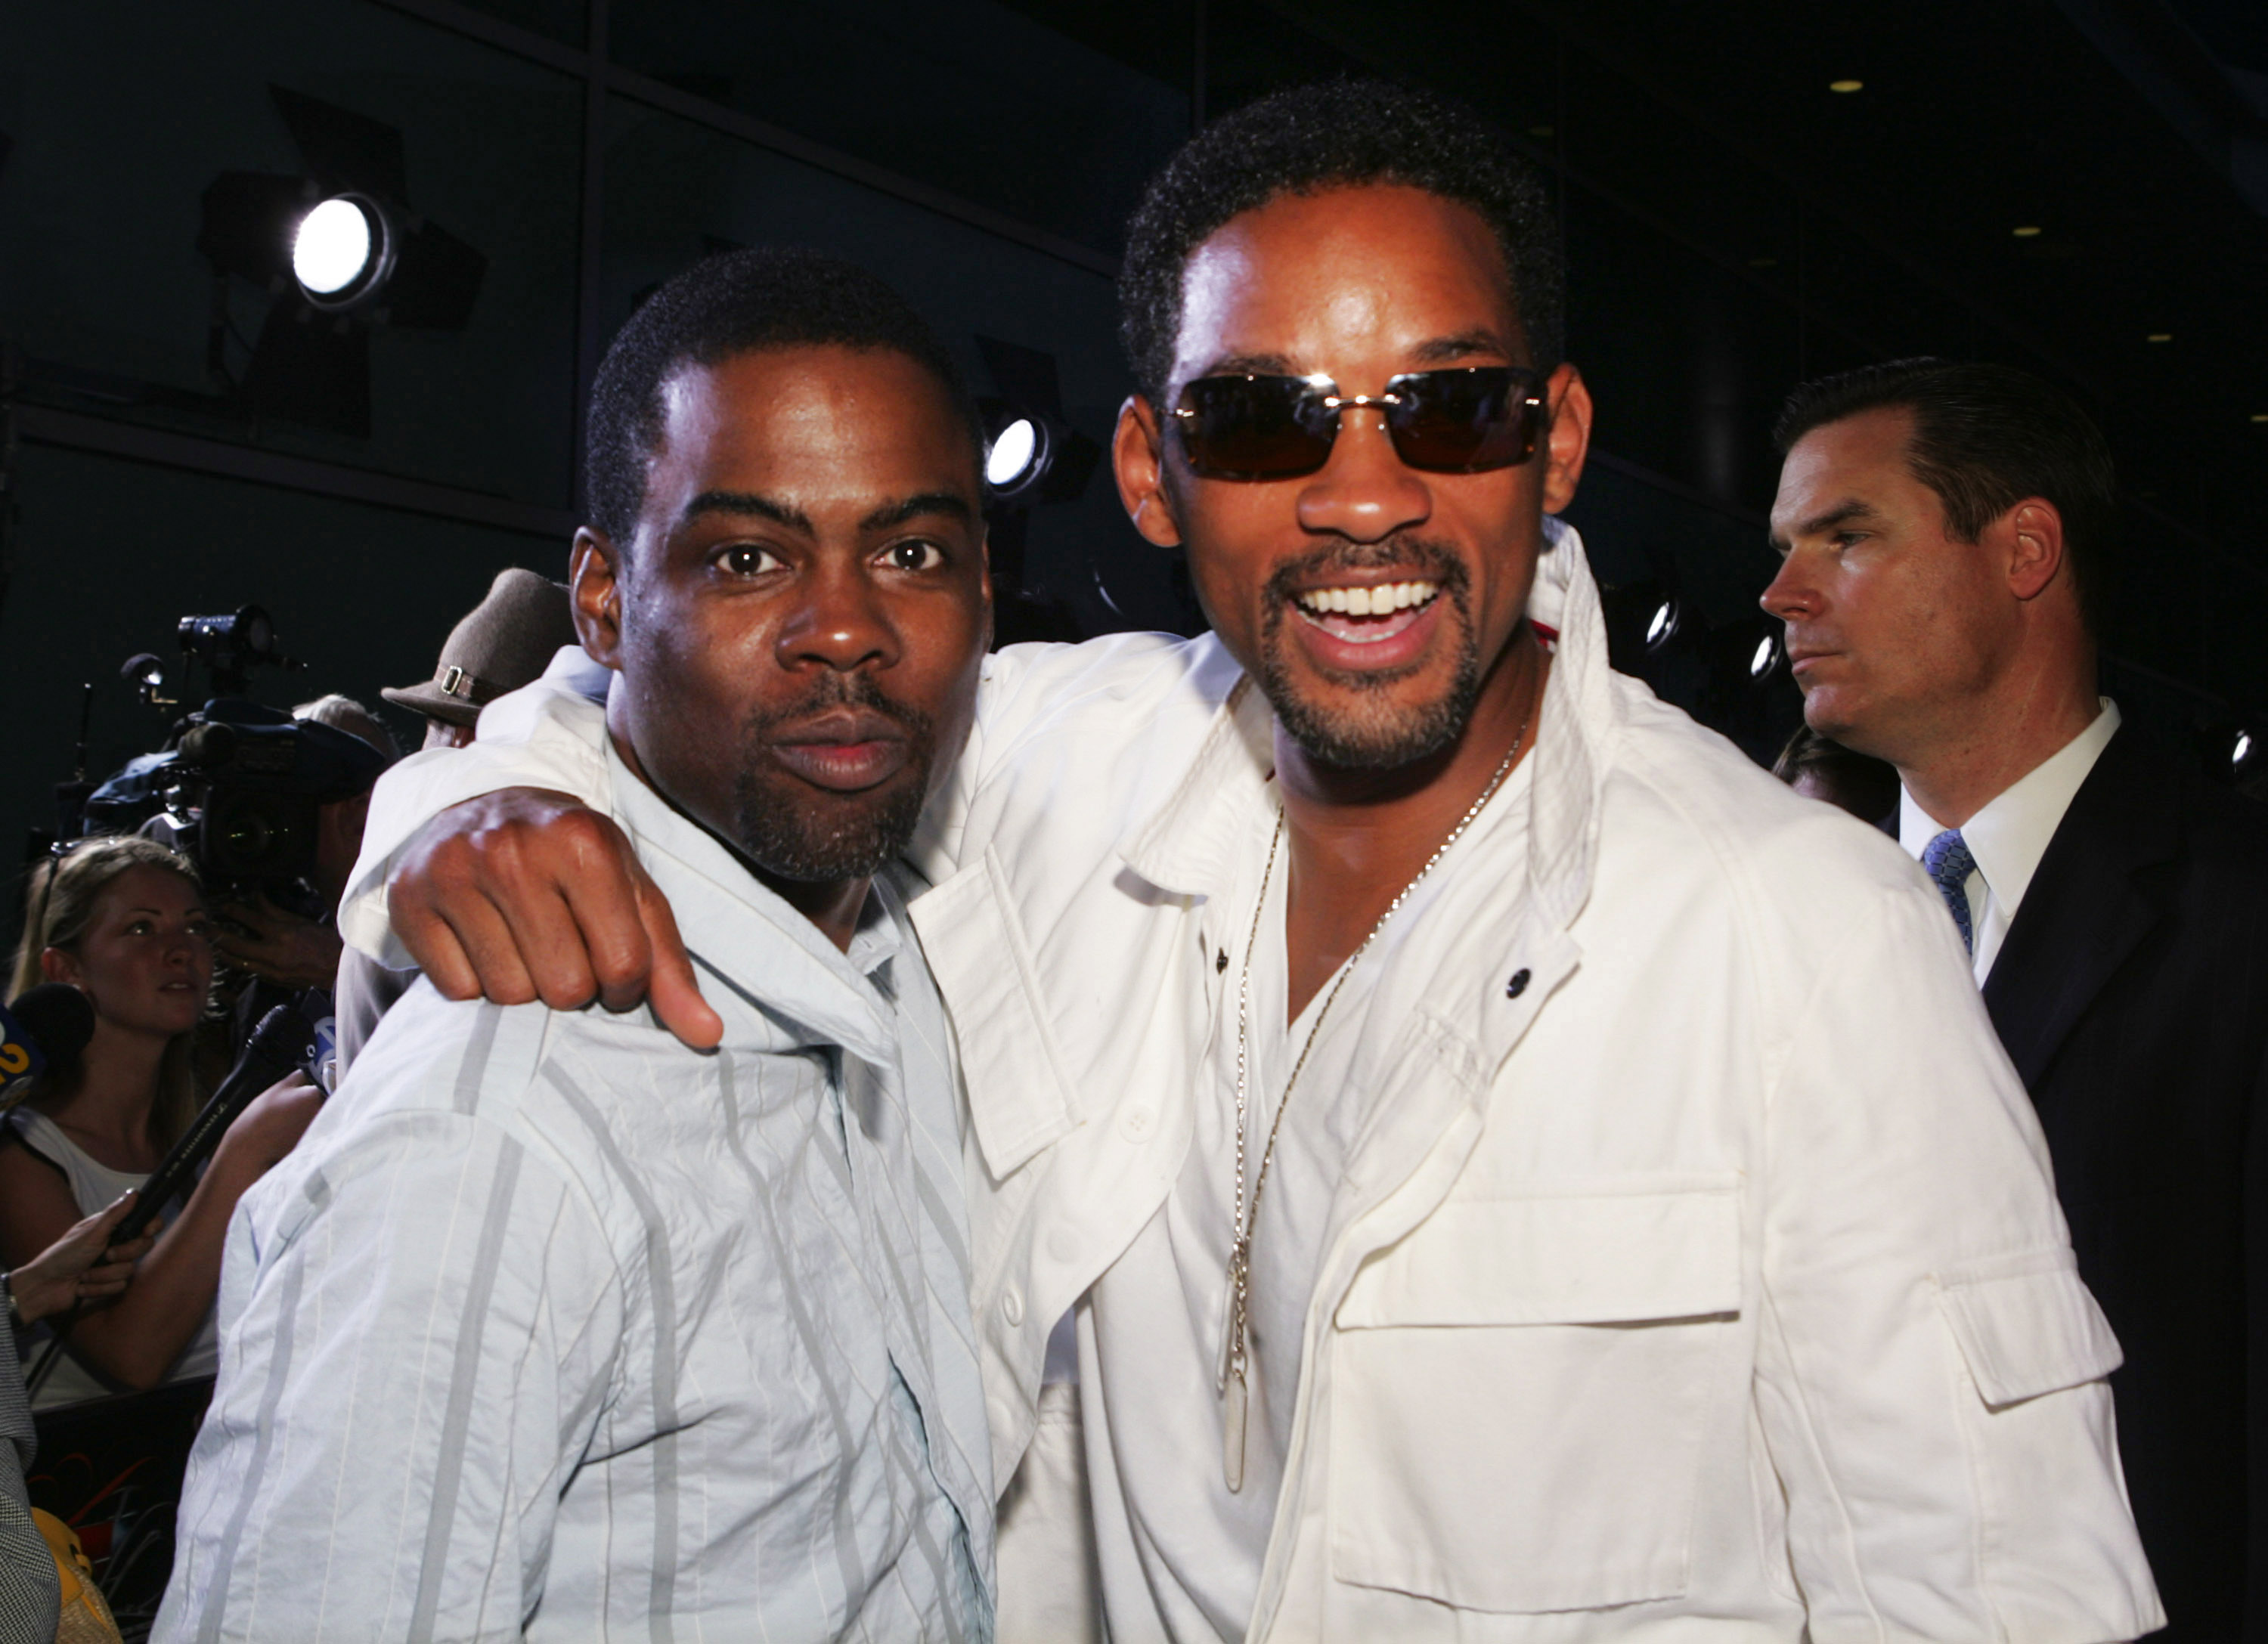 Chris Rock, who got slapped by and Will Smith even though Smith made bald jokes in the past, posing together at the Hustle & Flow premiere in 2005